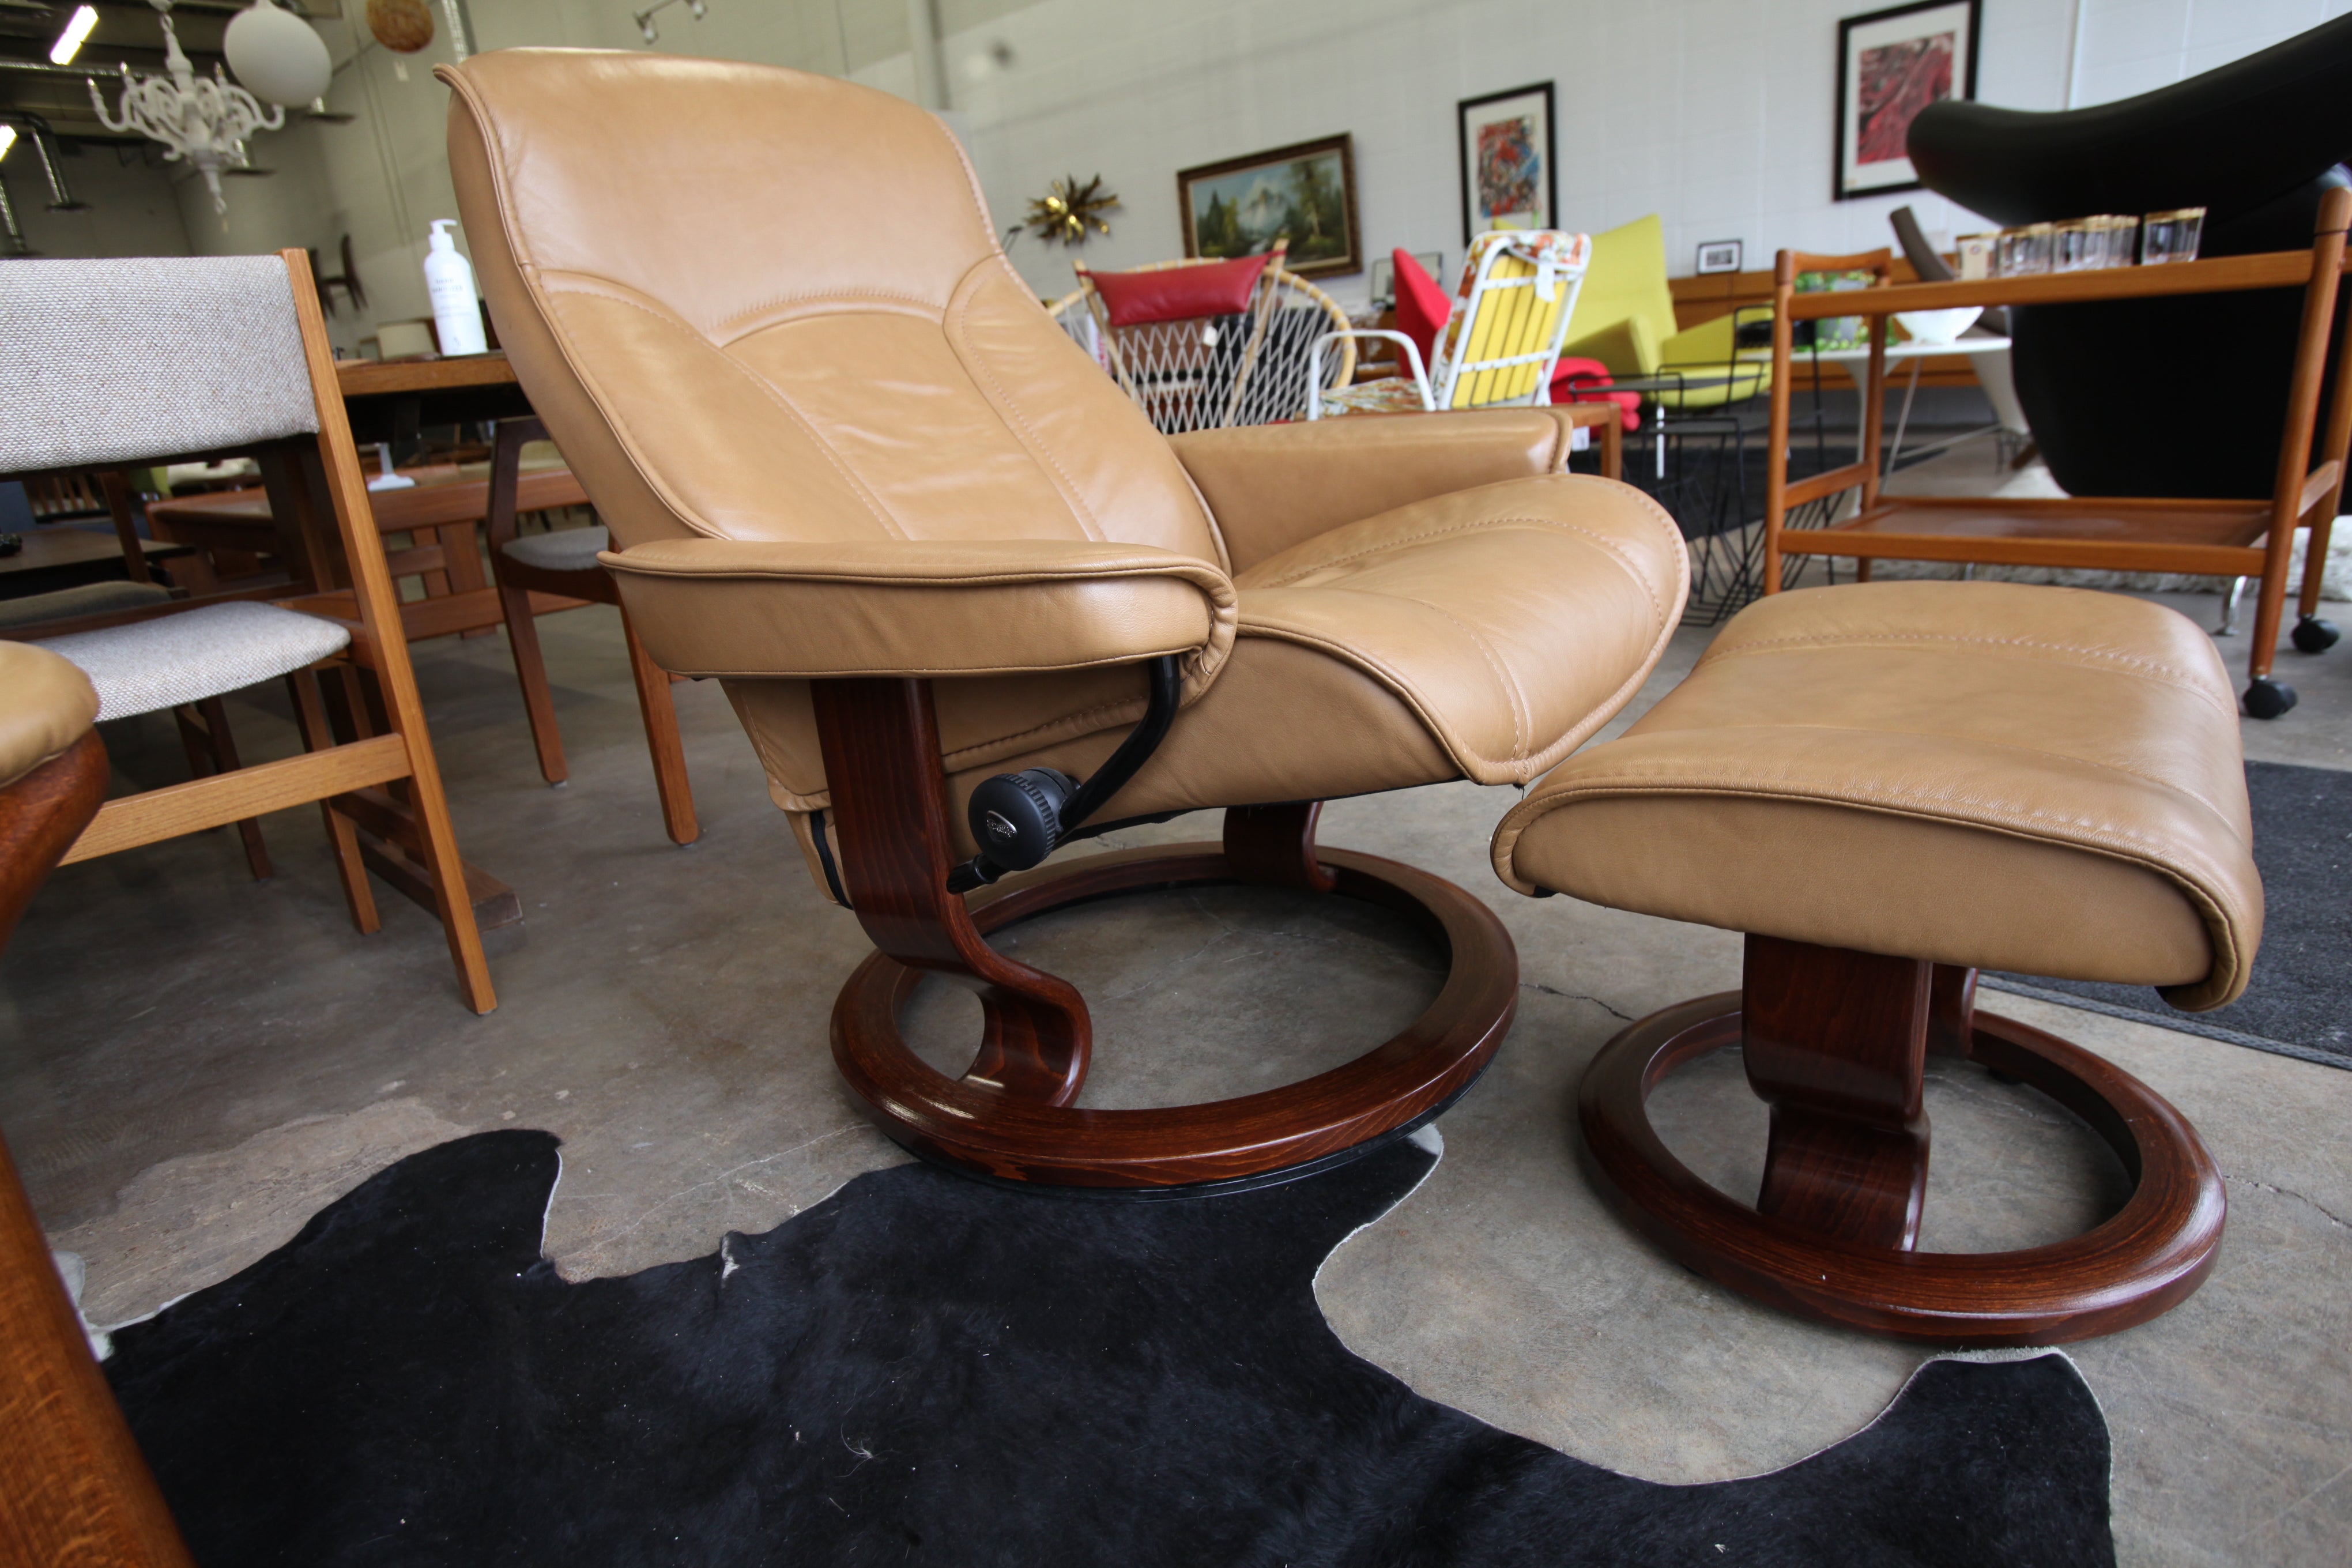 Vintage Ekornes Stressless Leather Recliner and Ottoman (34"W x 39.5"H x 32-38"D)